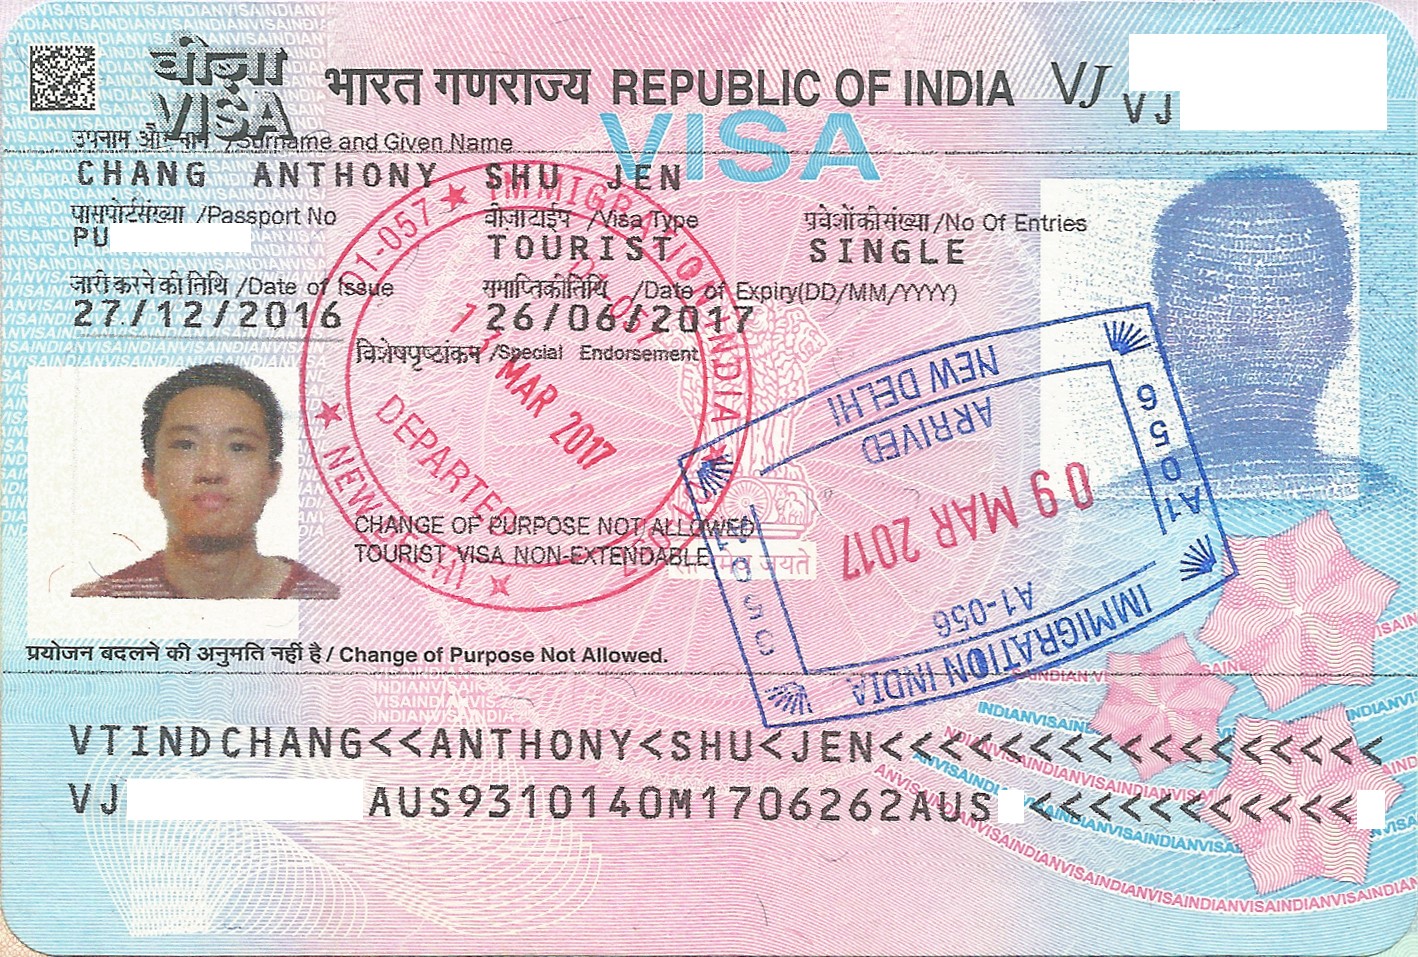 How to get an INDIAN VISA FROM JAPAN